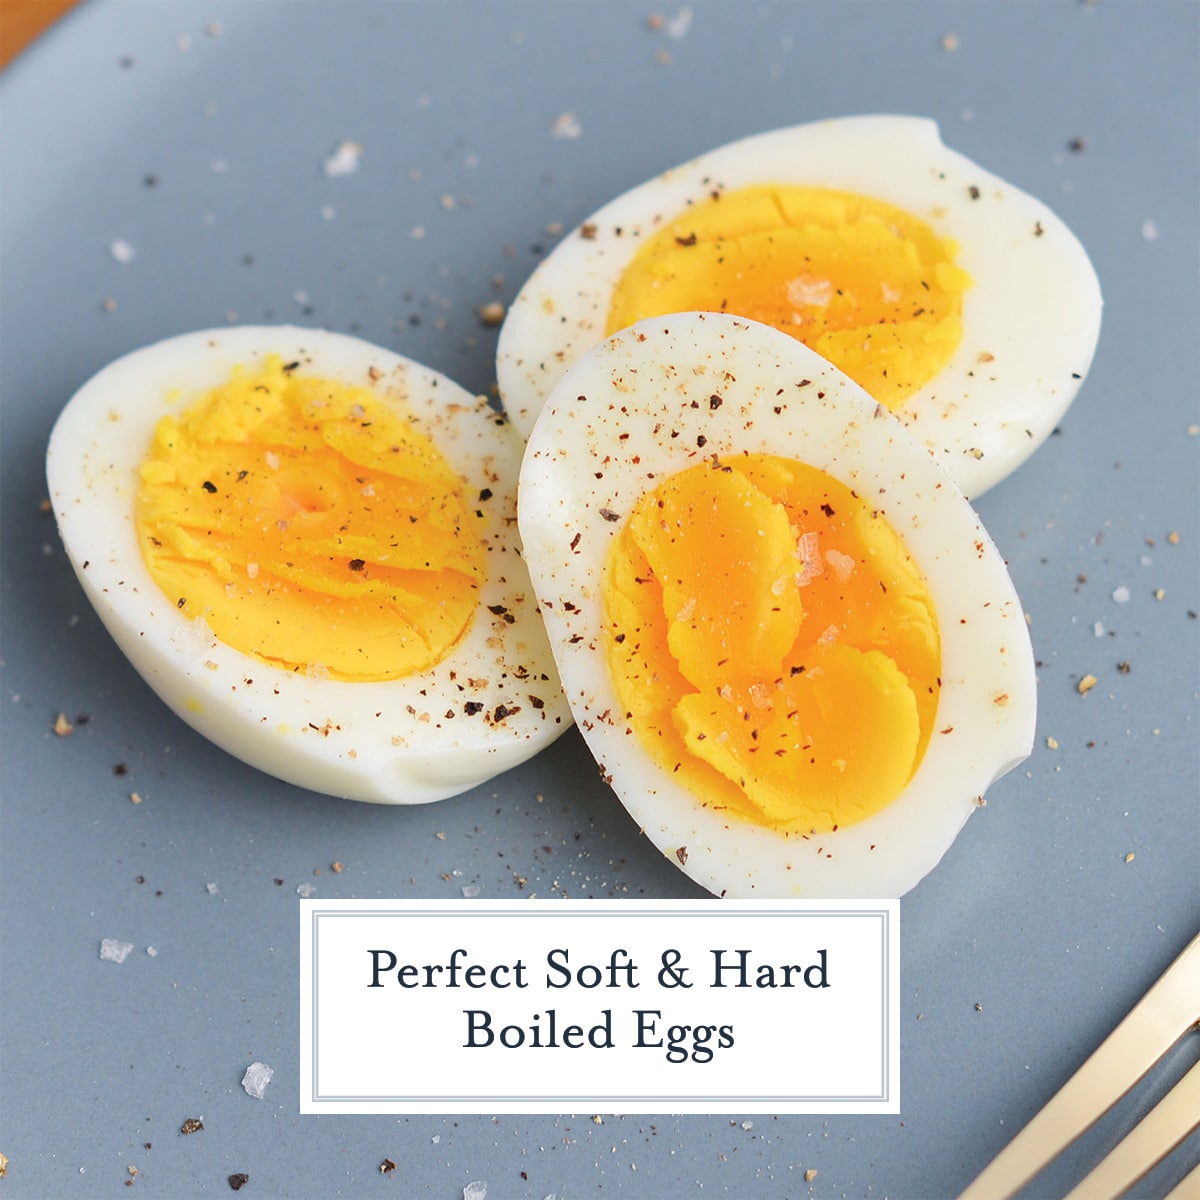 Get Perfectly Cooked Hard Boiled Eggs in Minutes Thanks to This